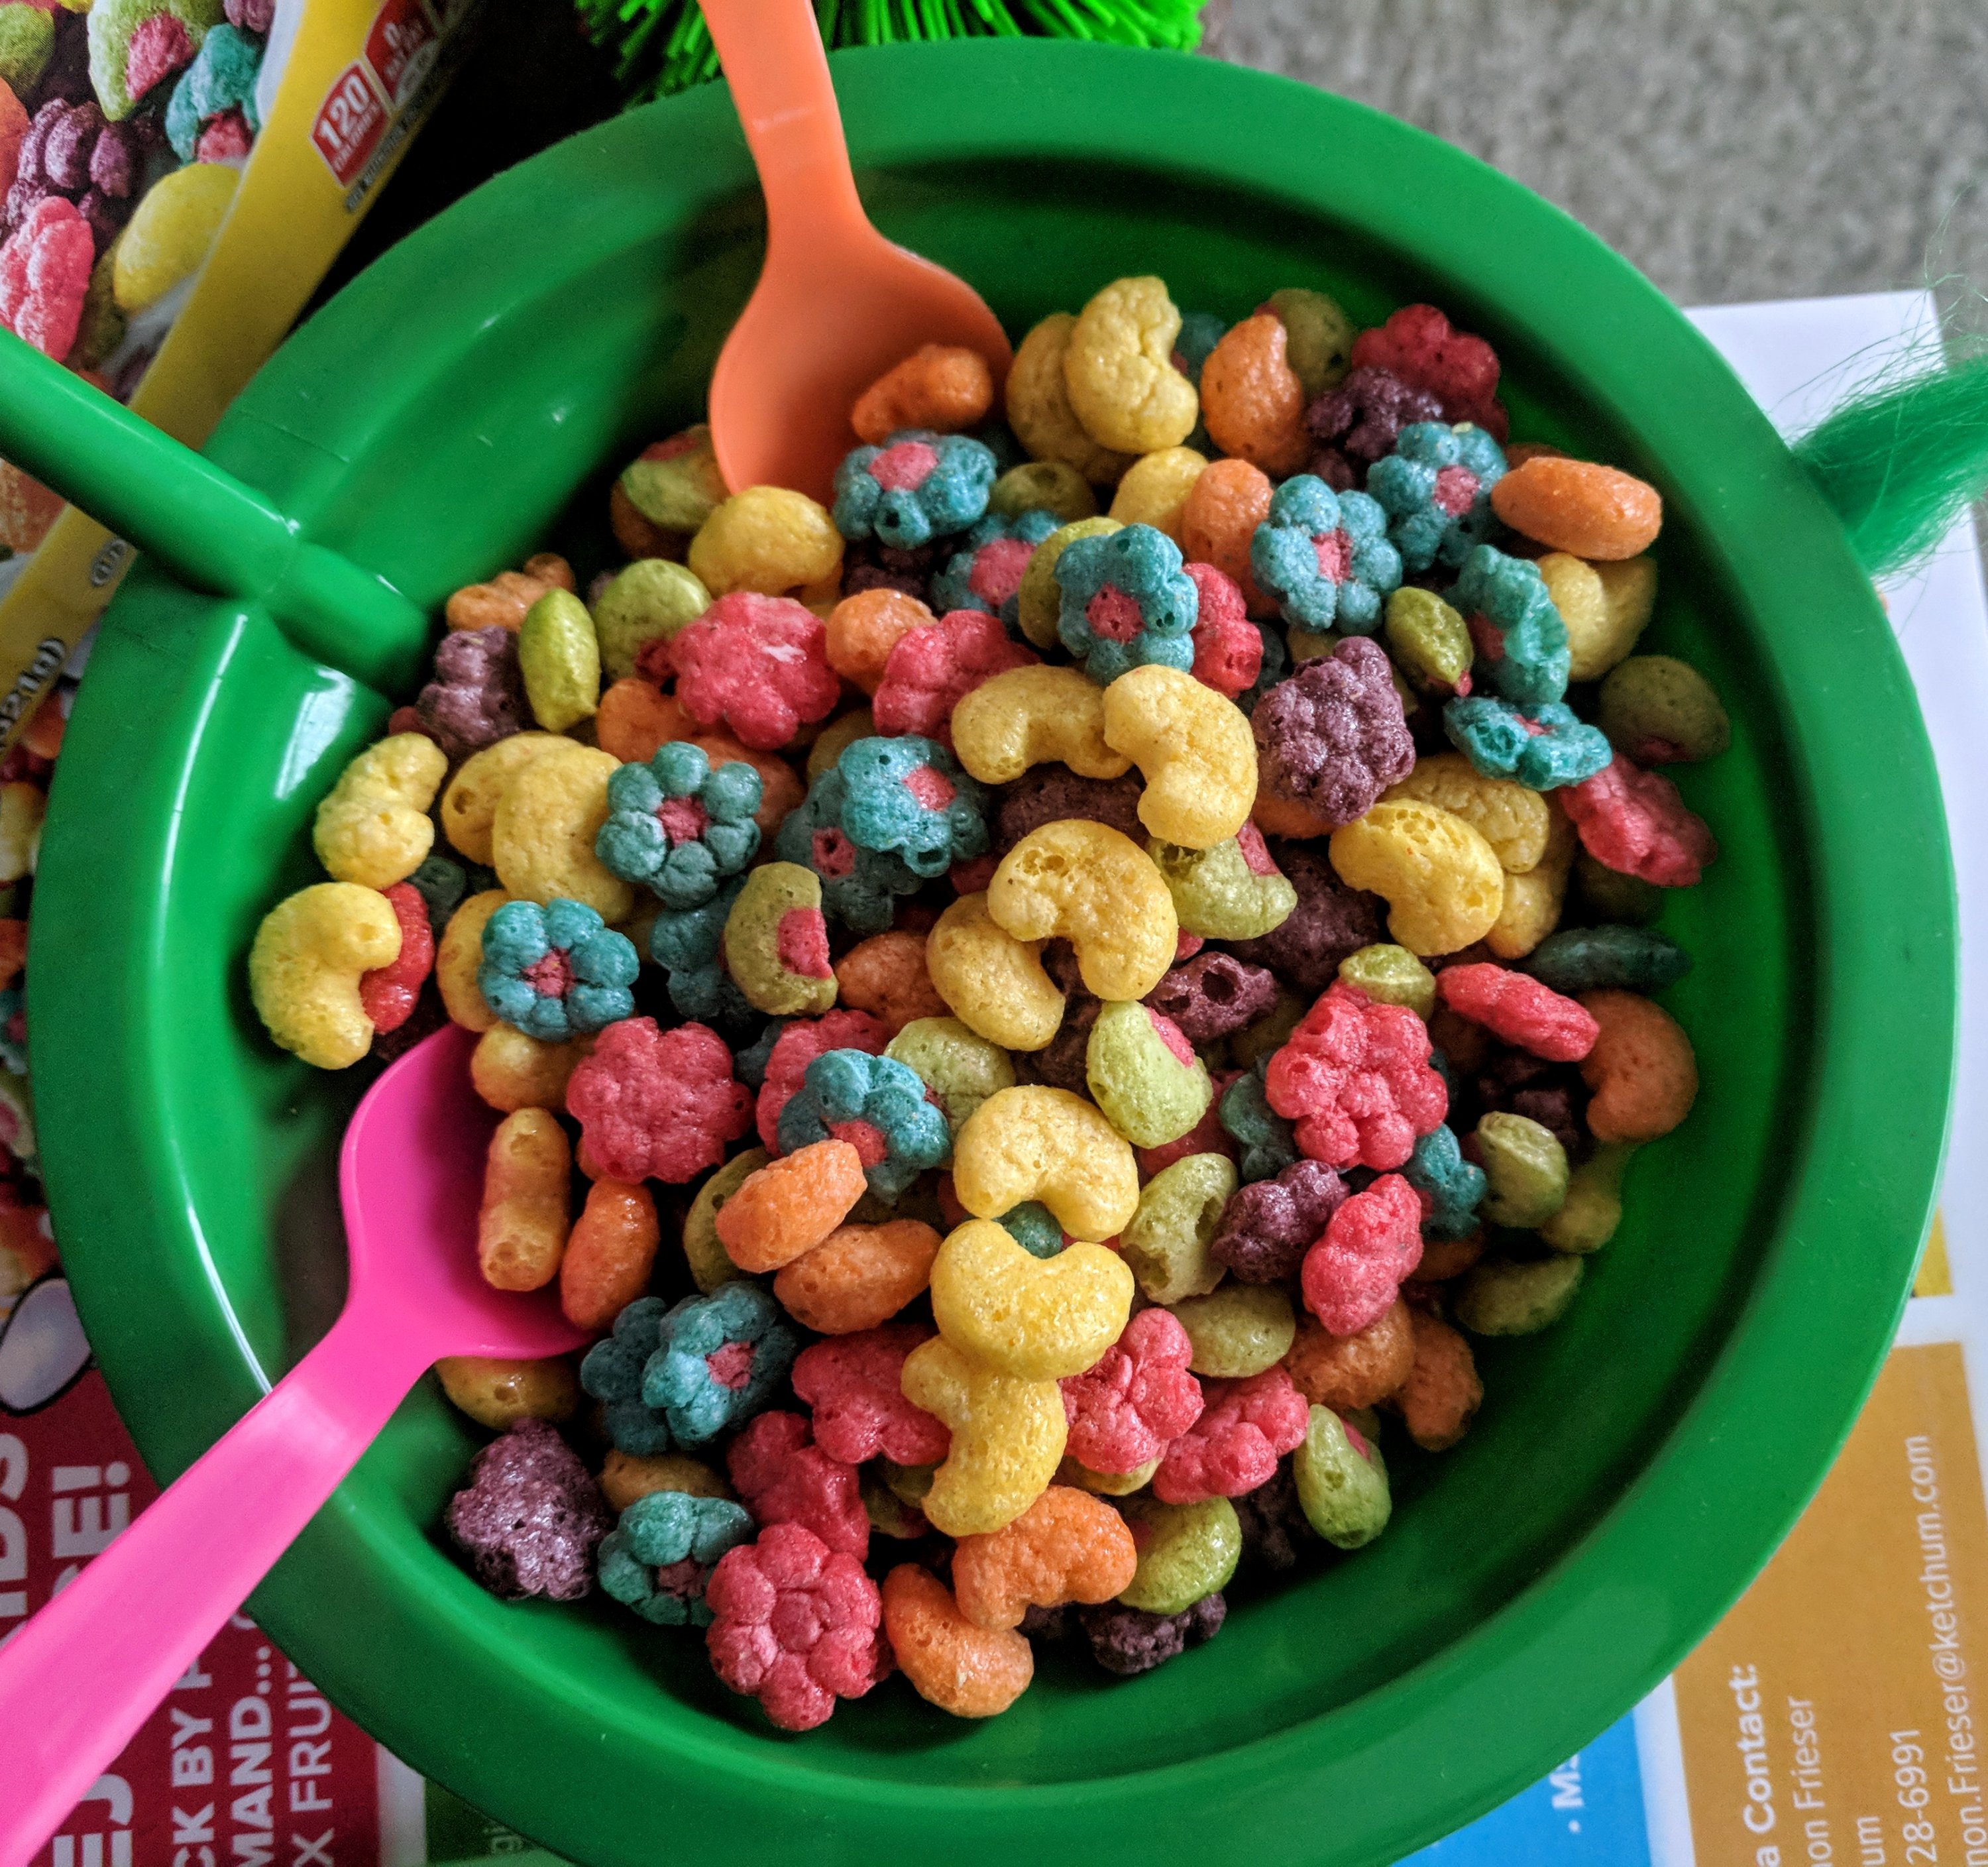 Trix with Fruit Shapes Cereal is Back from the '90s! Our review. 